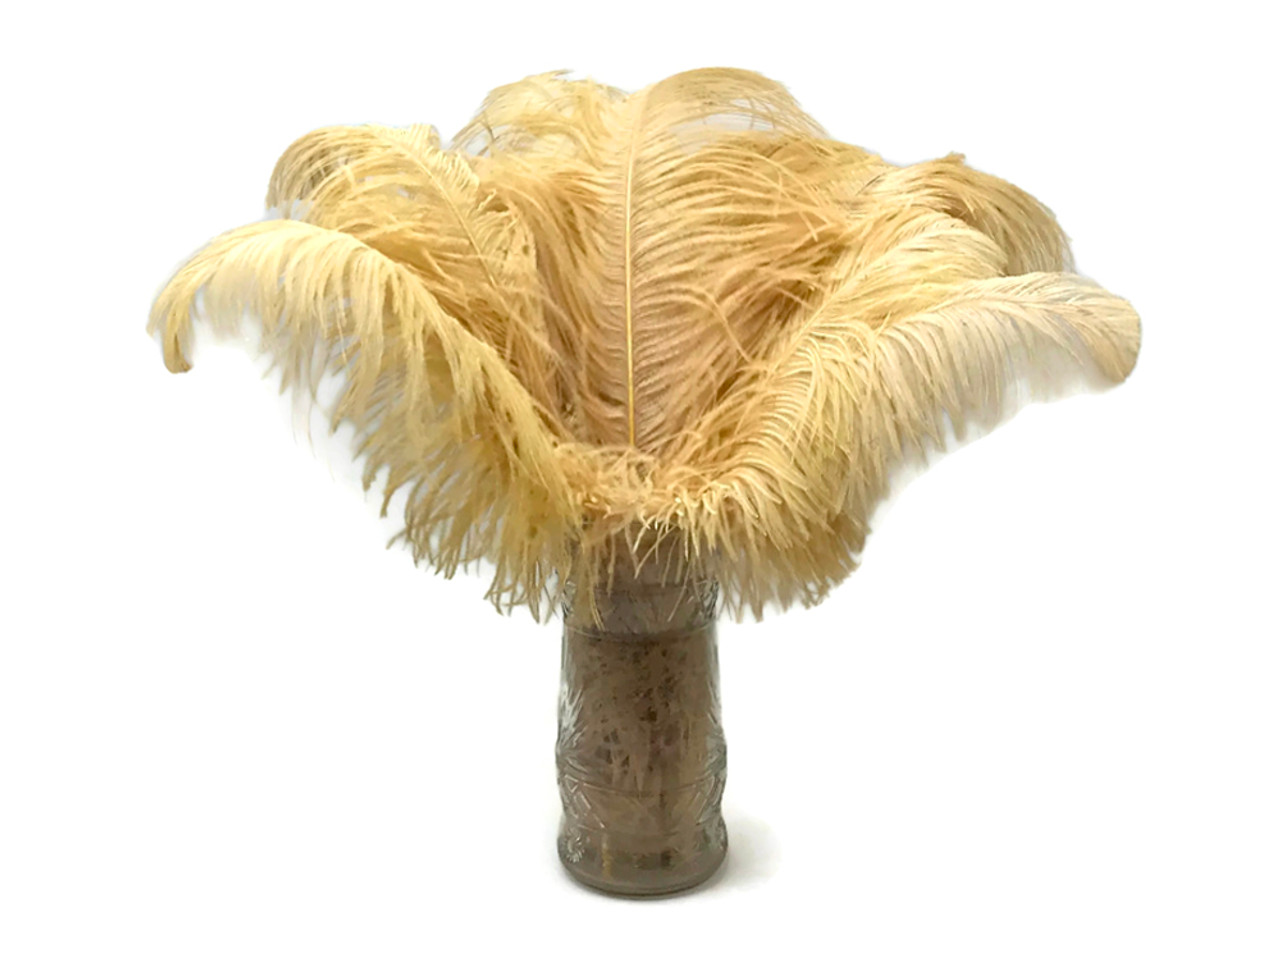 Bulk Ostrich Feathers for Sale Online